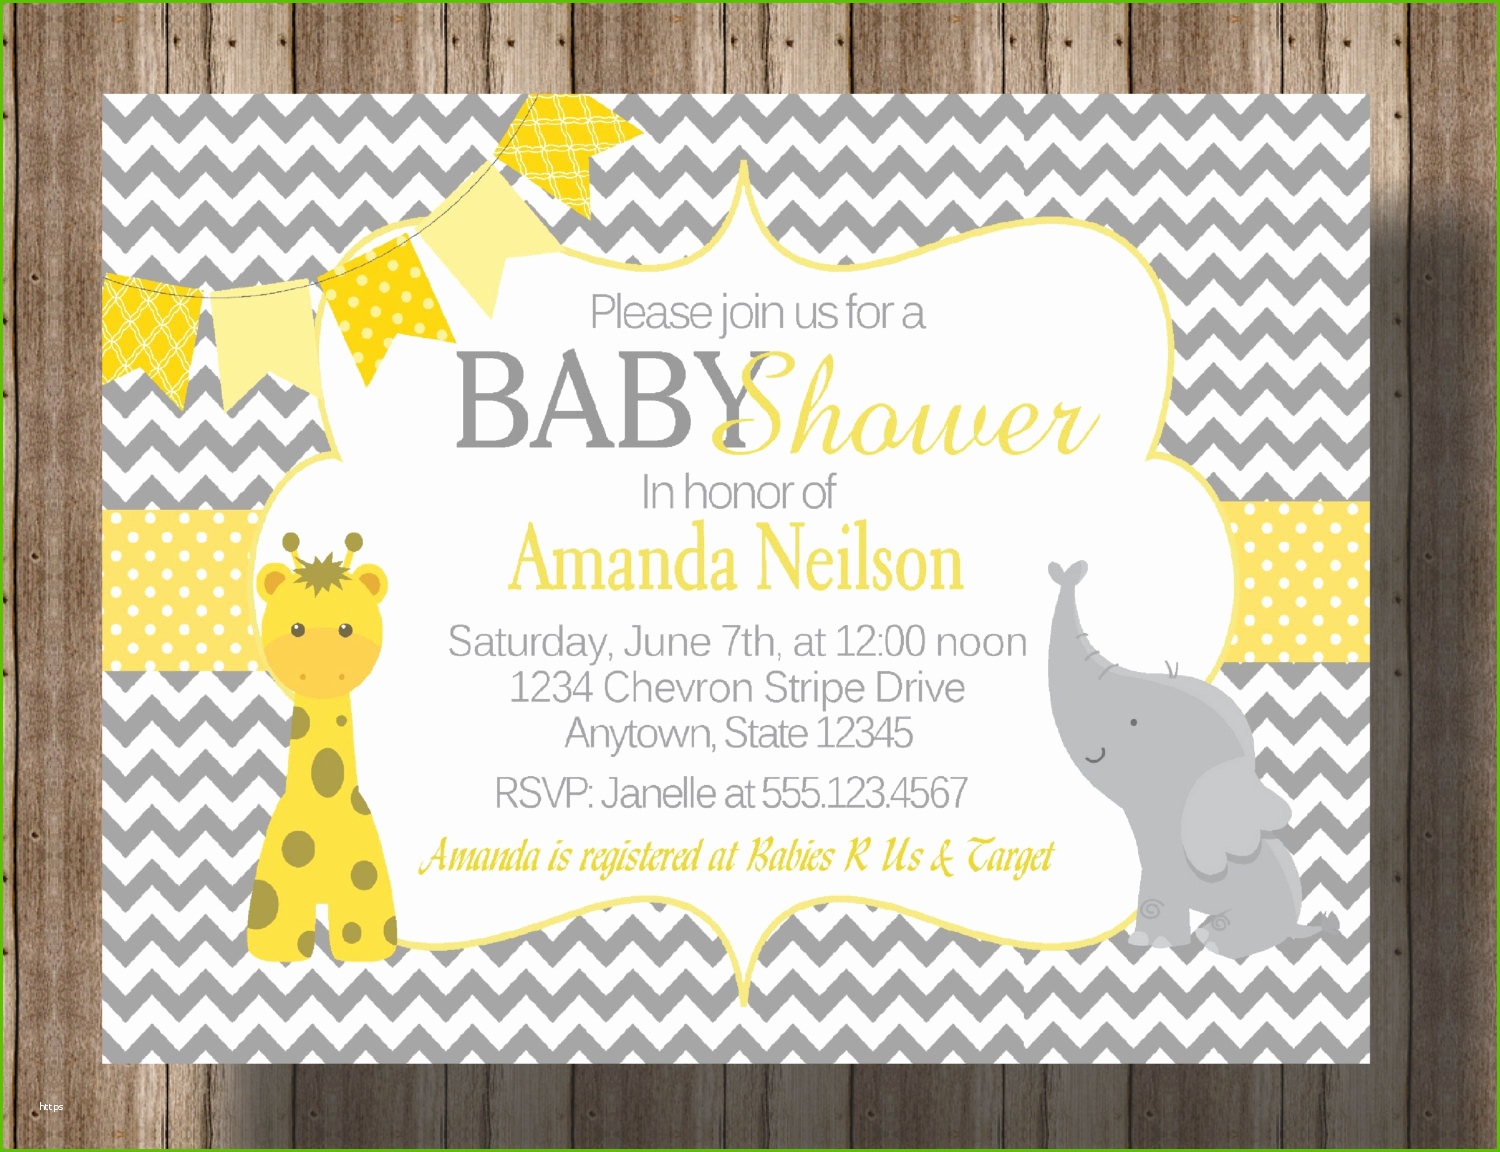 Full Size of Baby Shower:inspirational Elephant Baby Shower Invitations Photo Concepts Original Baby Shower Ideas Noah's Ark Baby Shower Baby Shower Game Ideas Practical Baby Shower Gifts